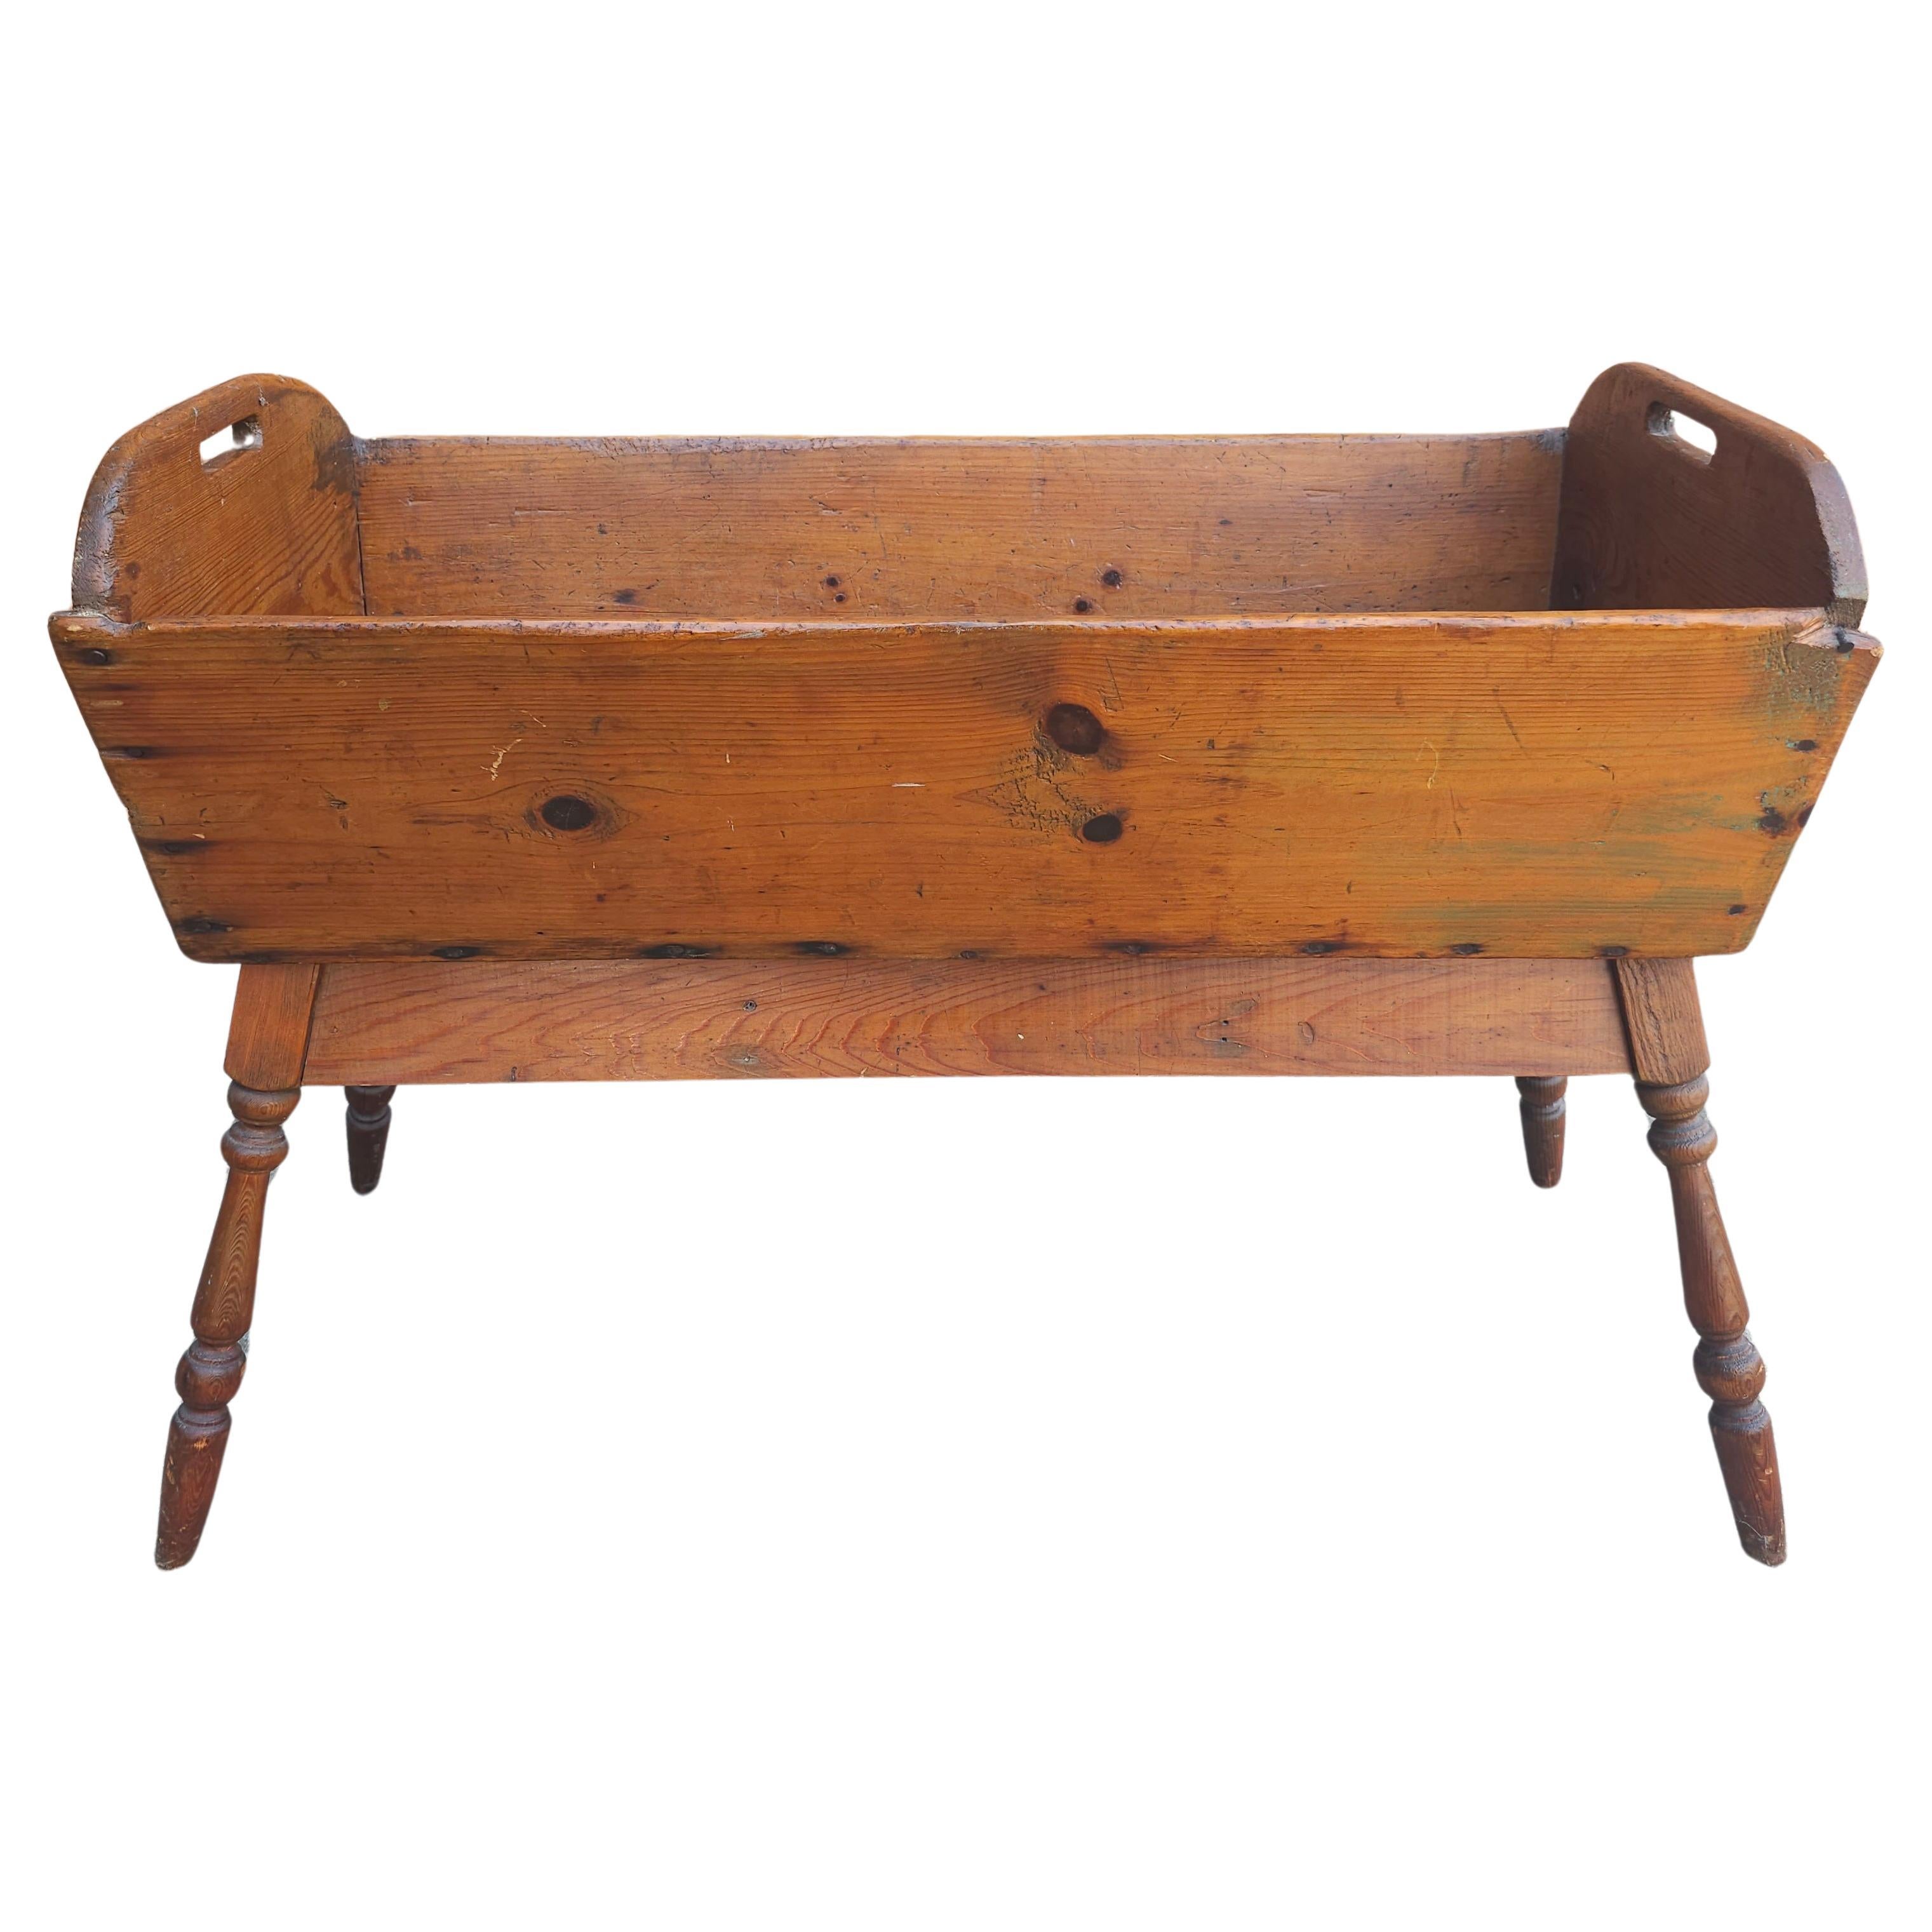 19th Century Pennsylvania Pine Dough Trough / Flower Bed Planter on Stand For Sale